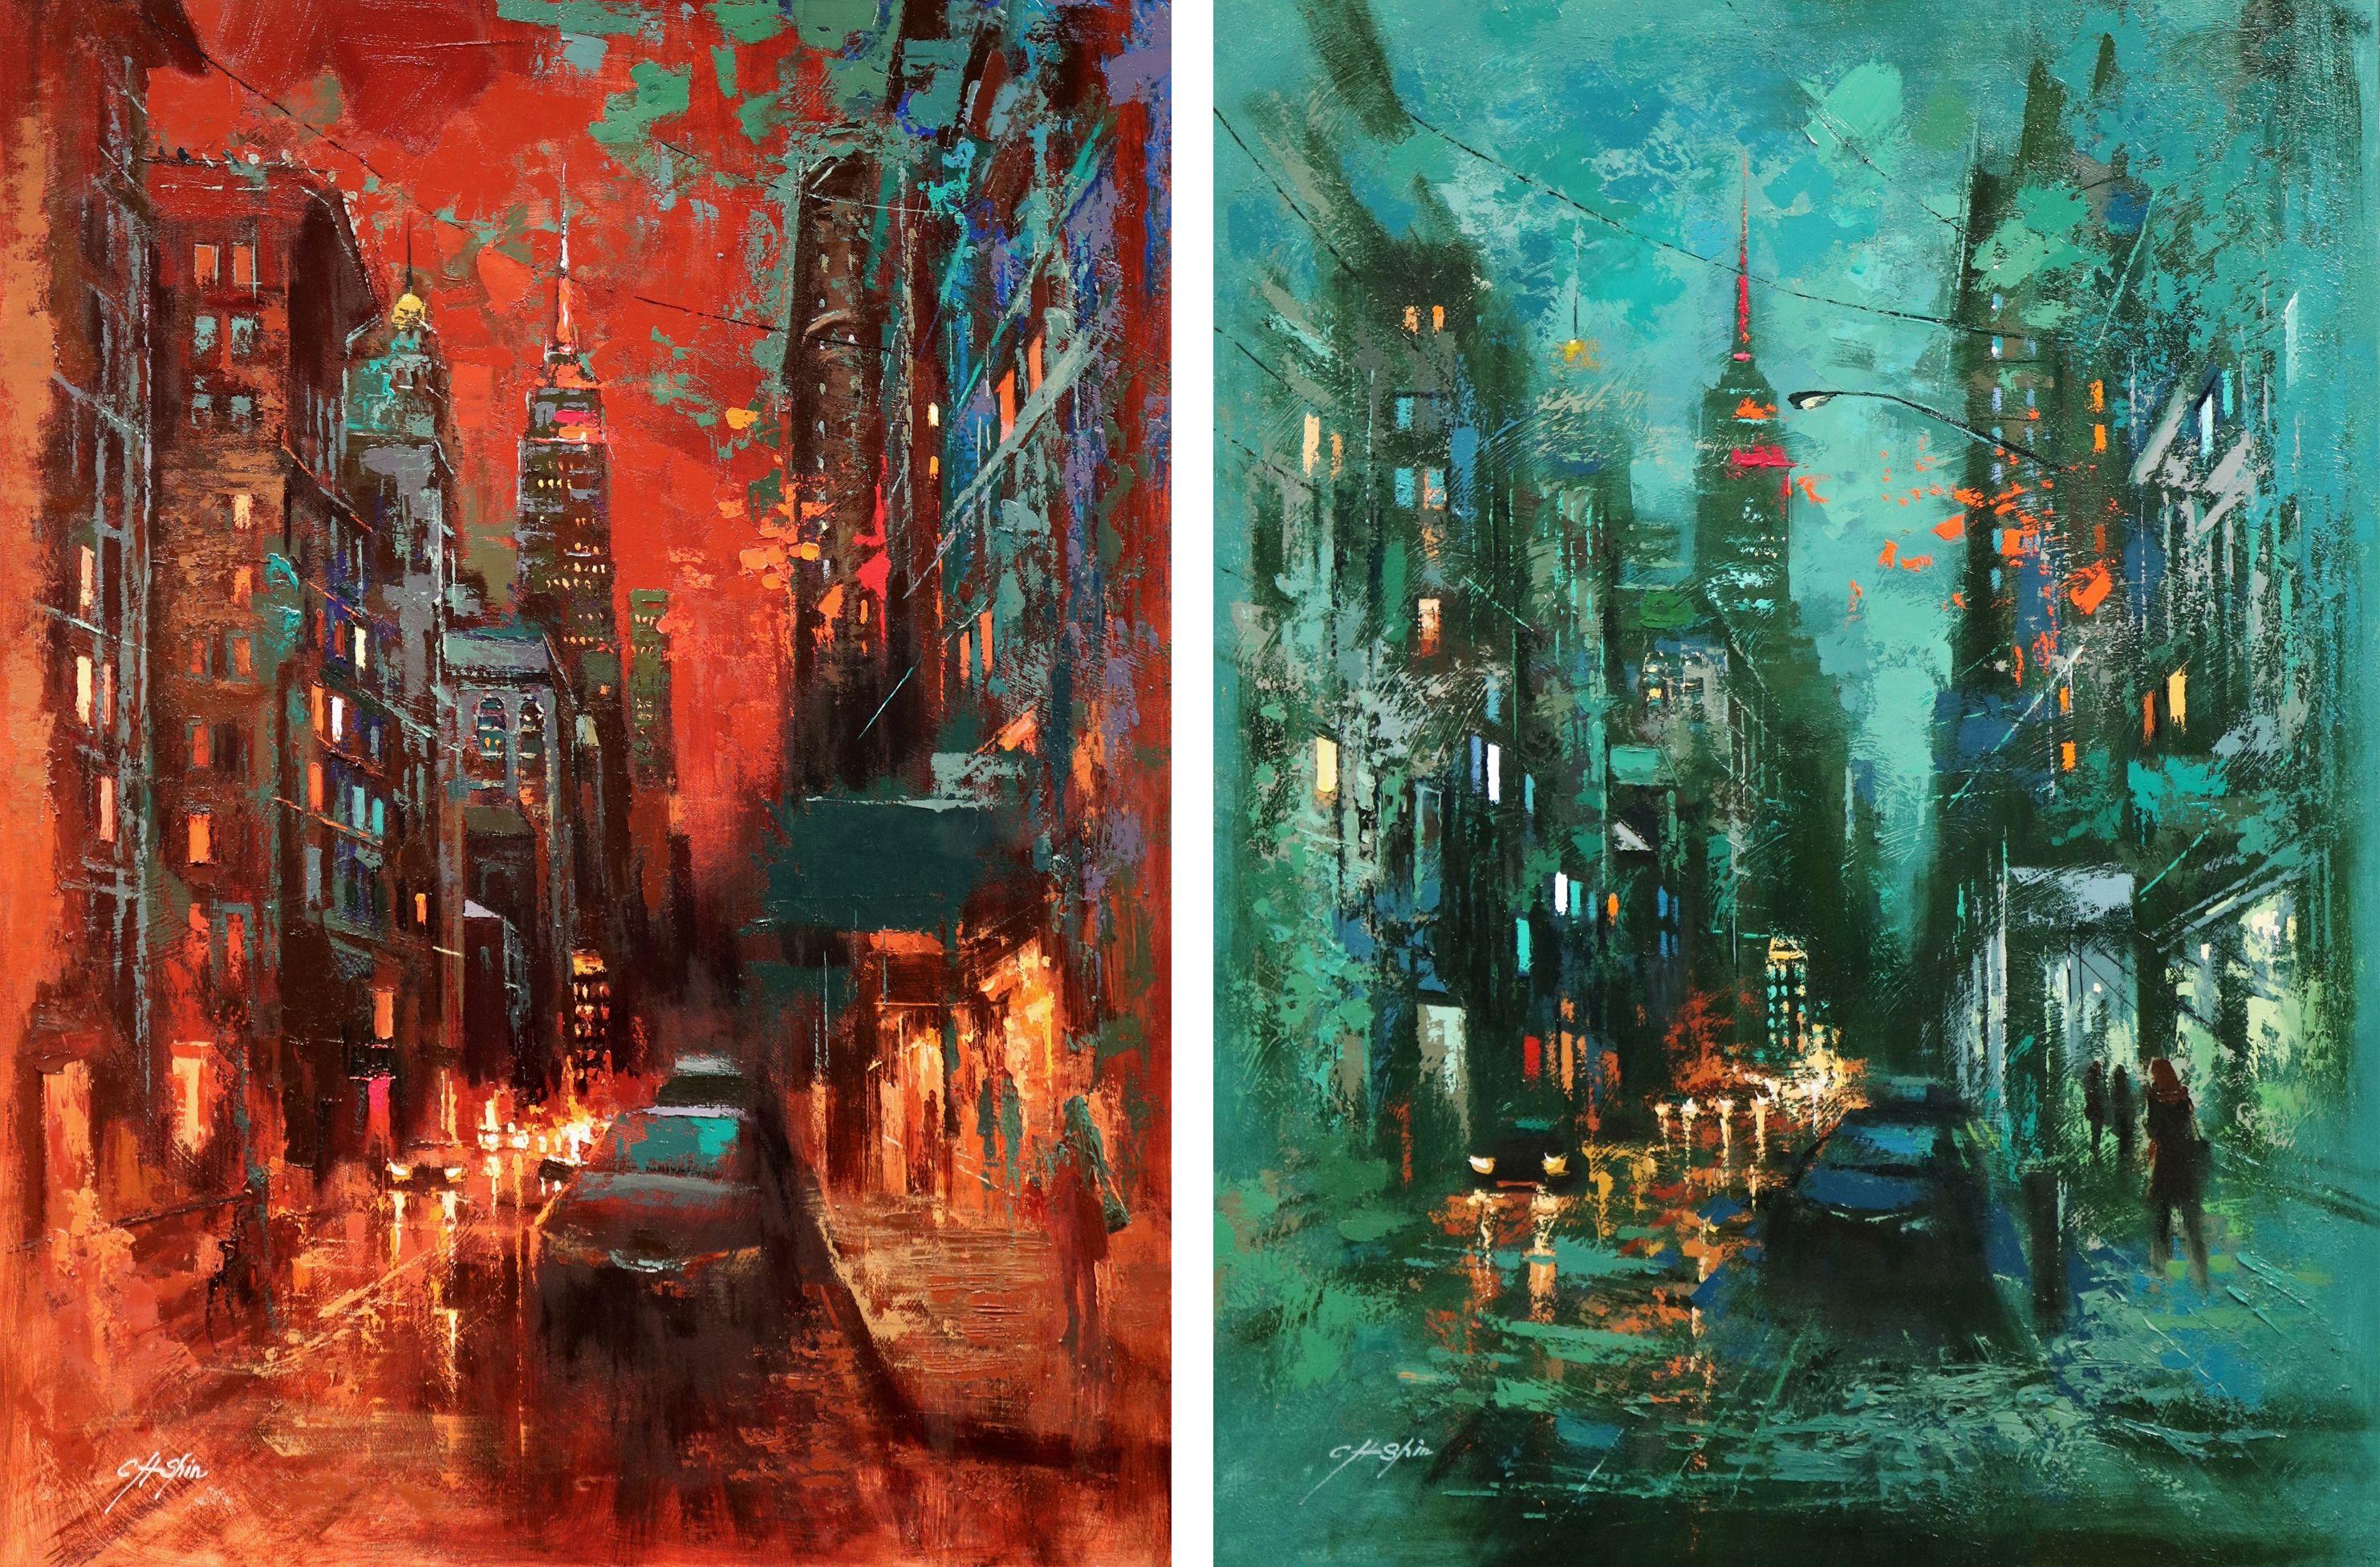 Oil on Canvas    40 x 30 x 1.5 inches    * from New York city    * inspired by city of Ancient Spirit    * when I was working in the city a long time ago,  I wasn't thinking about too much about the beauty  or value of New York city that much only